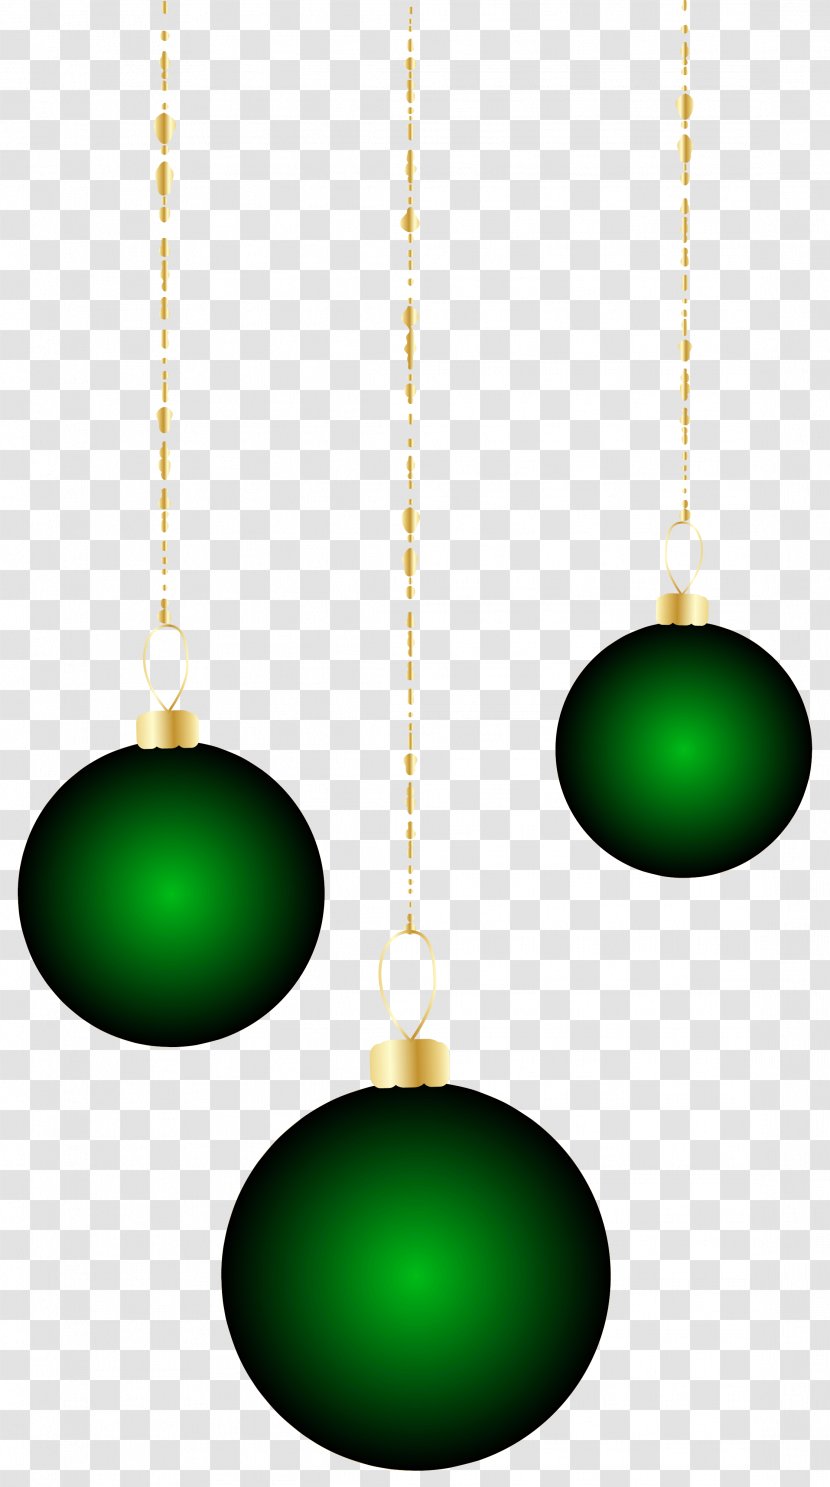 Green Body Piercing Jewellery Sphere Christmas Ornament - Transparent Ornaments Clipart Transparent PNG